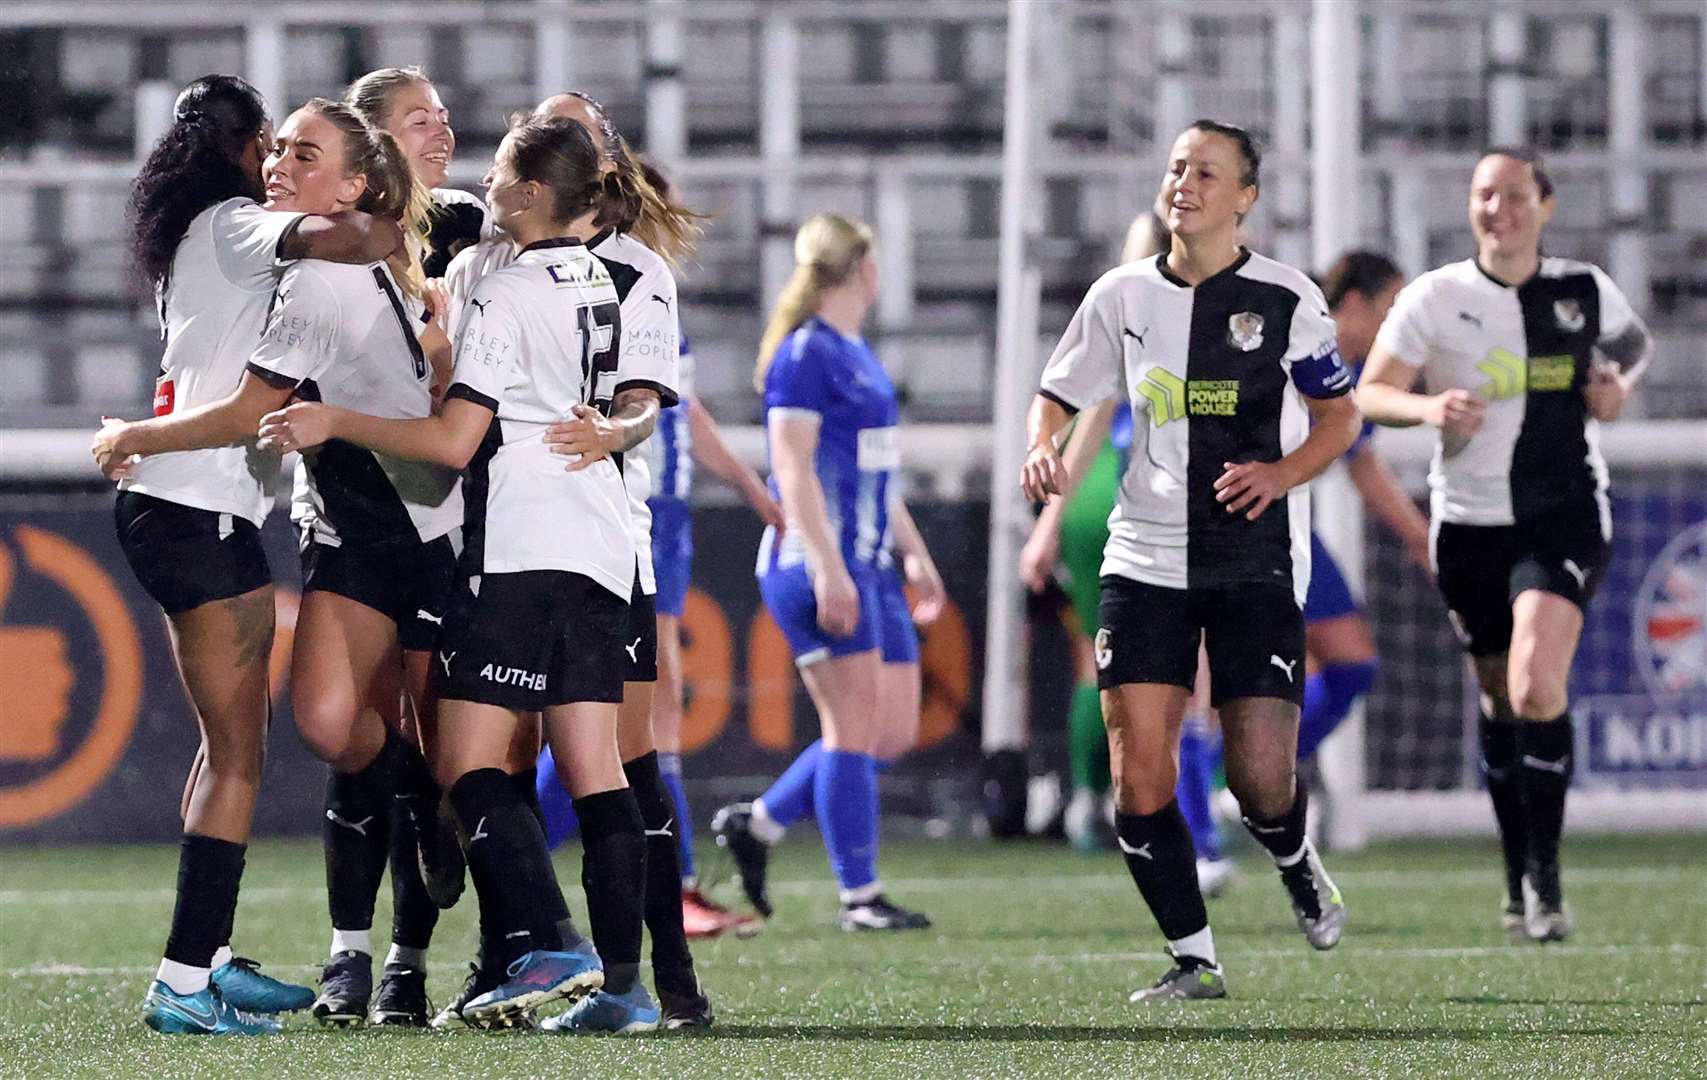 Dartford celebrate after Gabby Howell scored what proved to be the winner against Aylesford. Picture: PSP Images